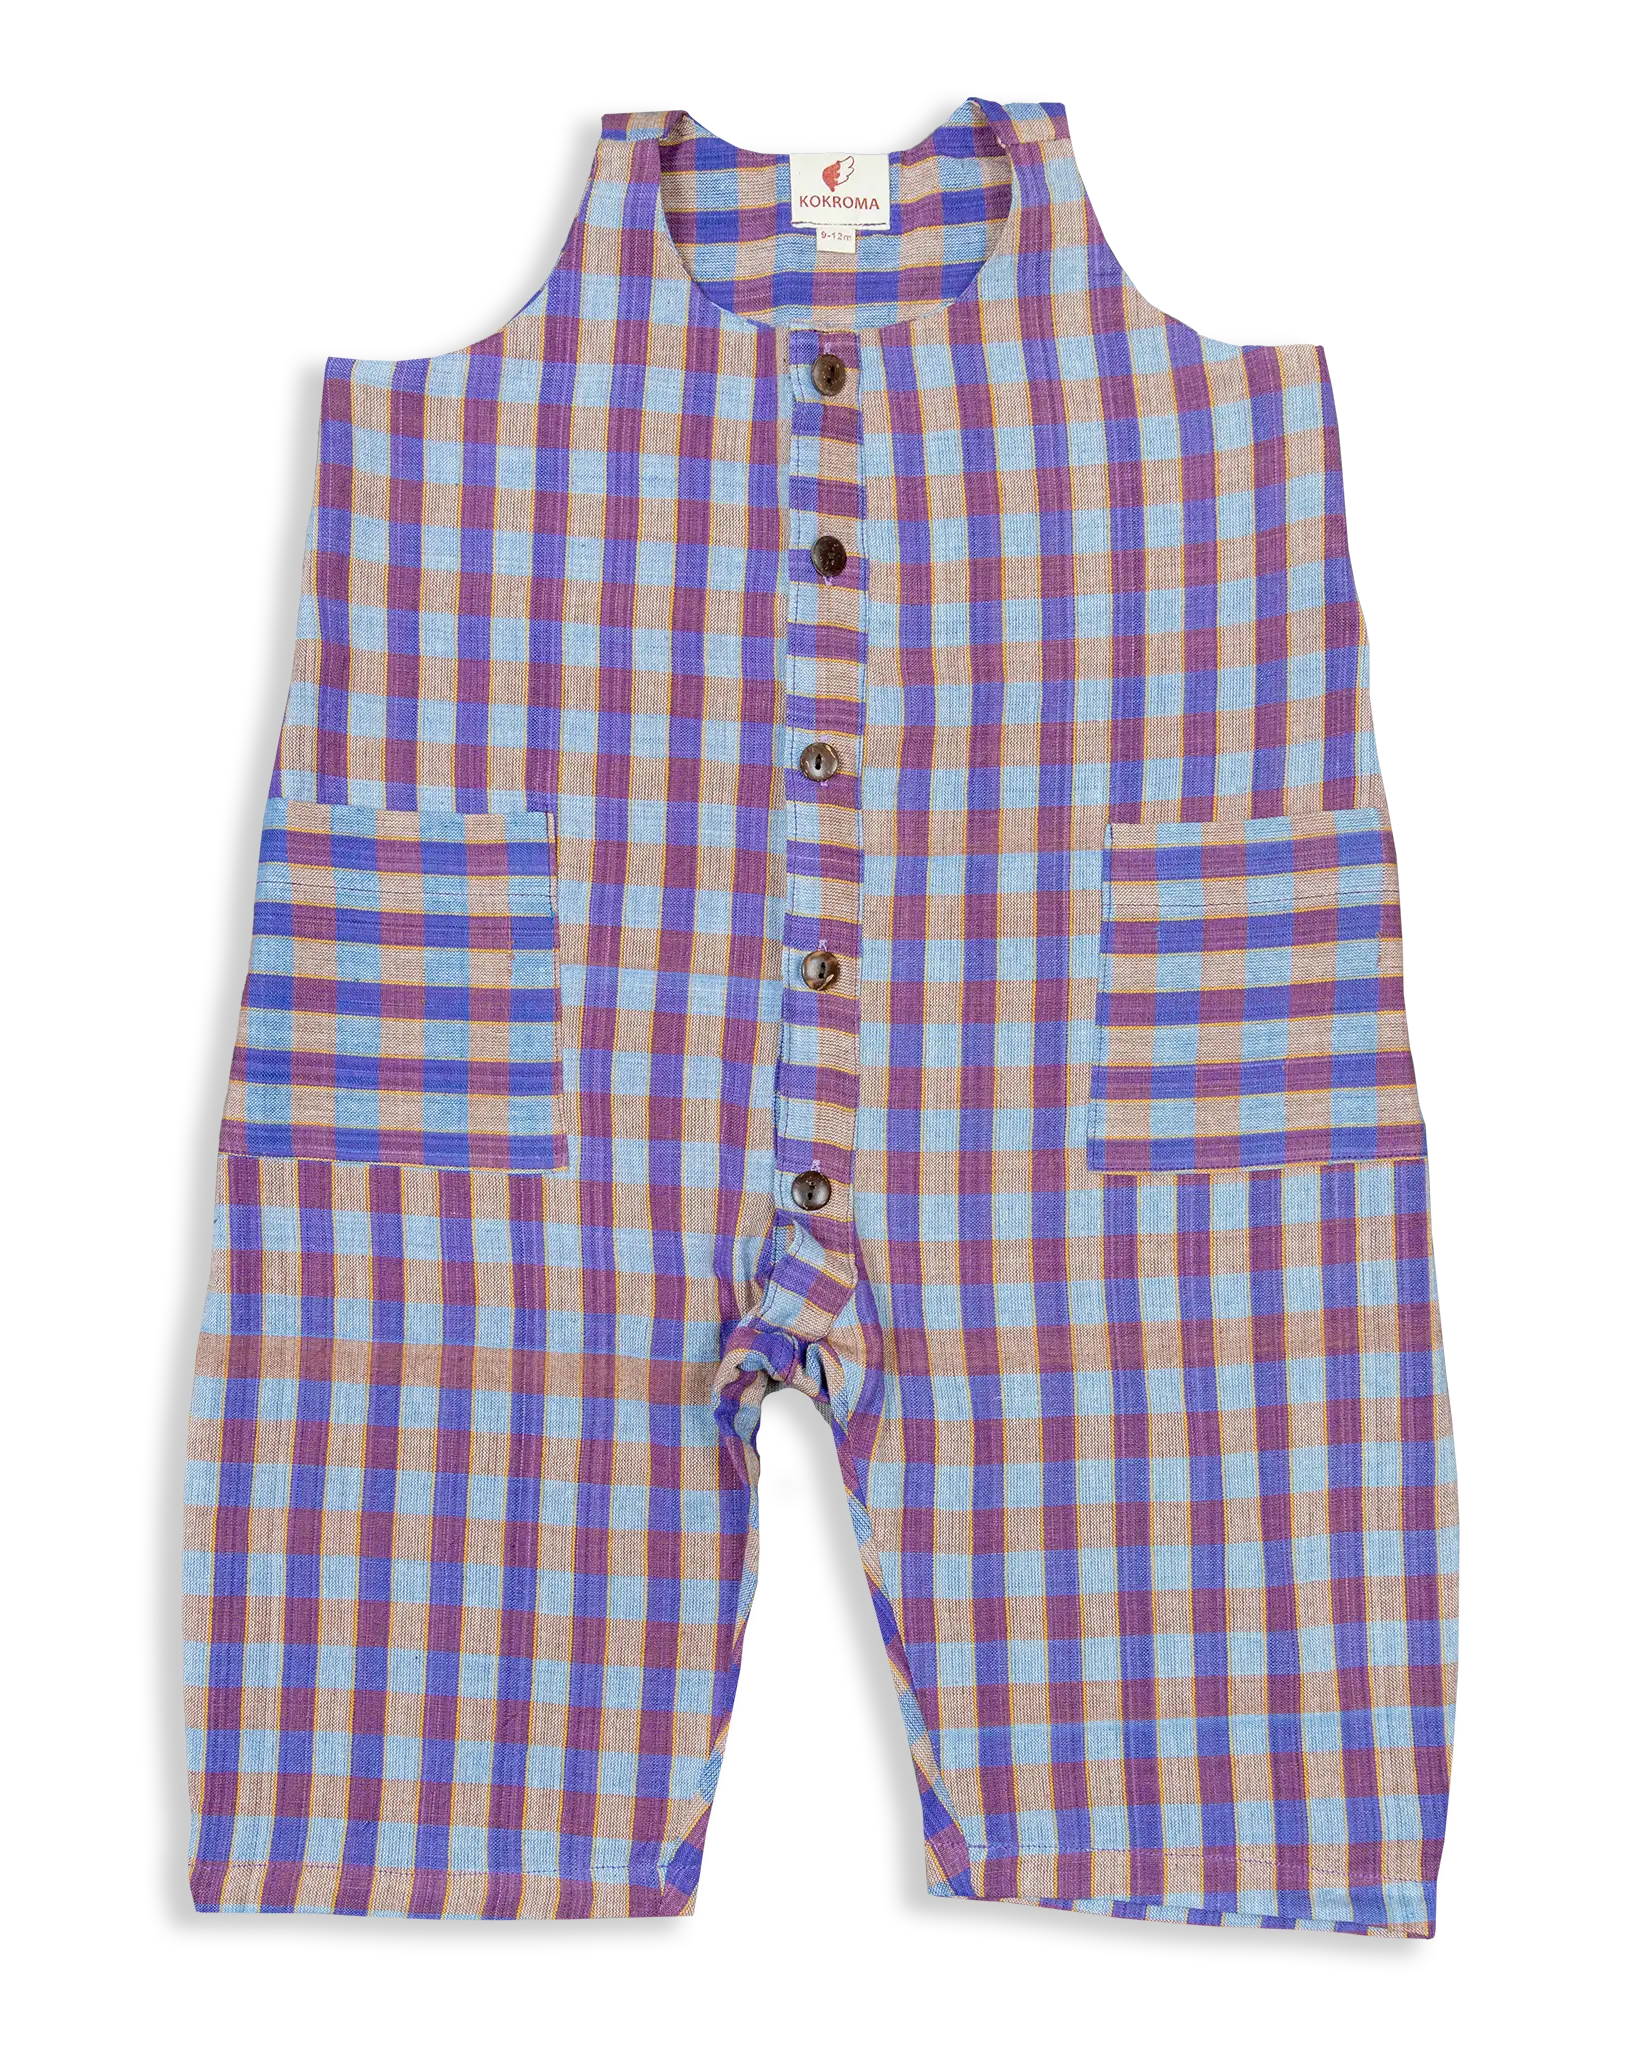 Children love soft, breathable cotton clothes! These Jumpsuit with buttons are made from woven fabrics which are unisex, simple yet cool to wear this summer. Our textiles are woven by inmates here in Nepal that provide an opportunity to generate income and support families back home.